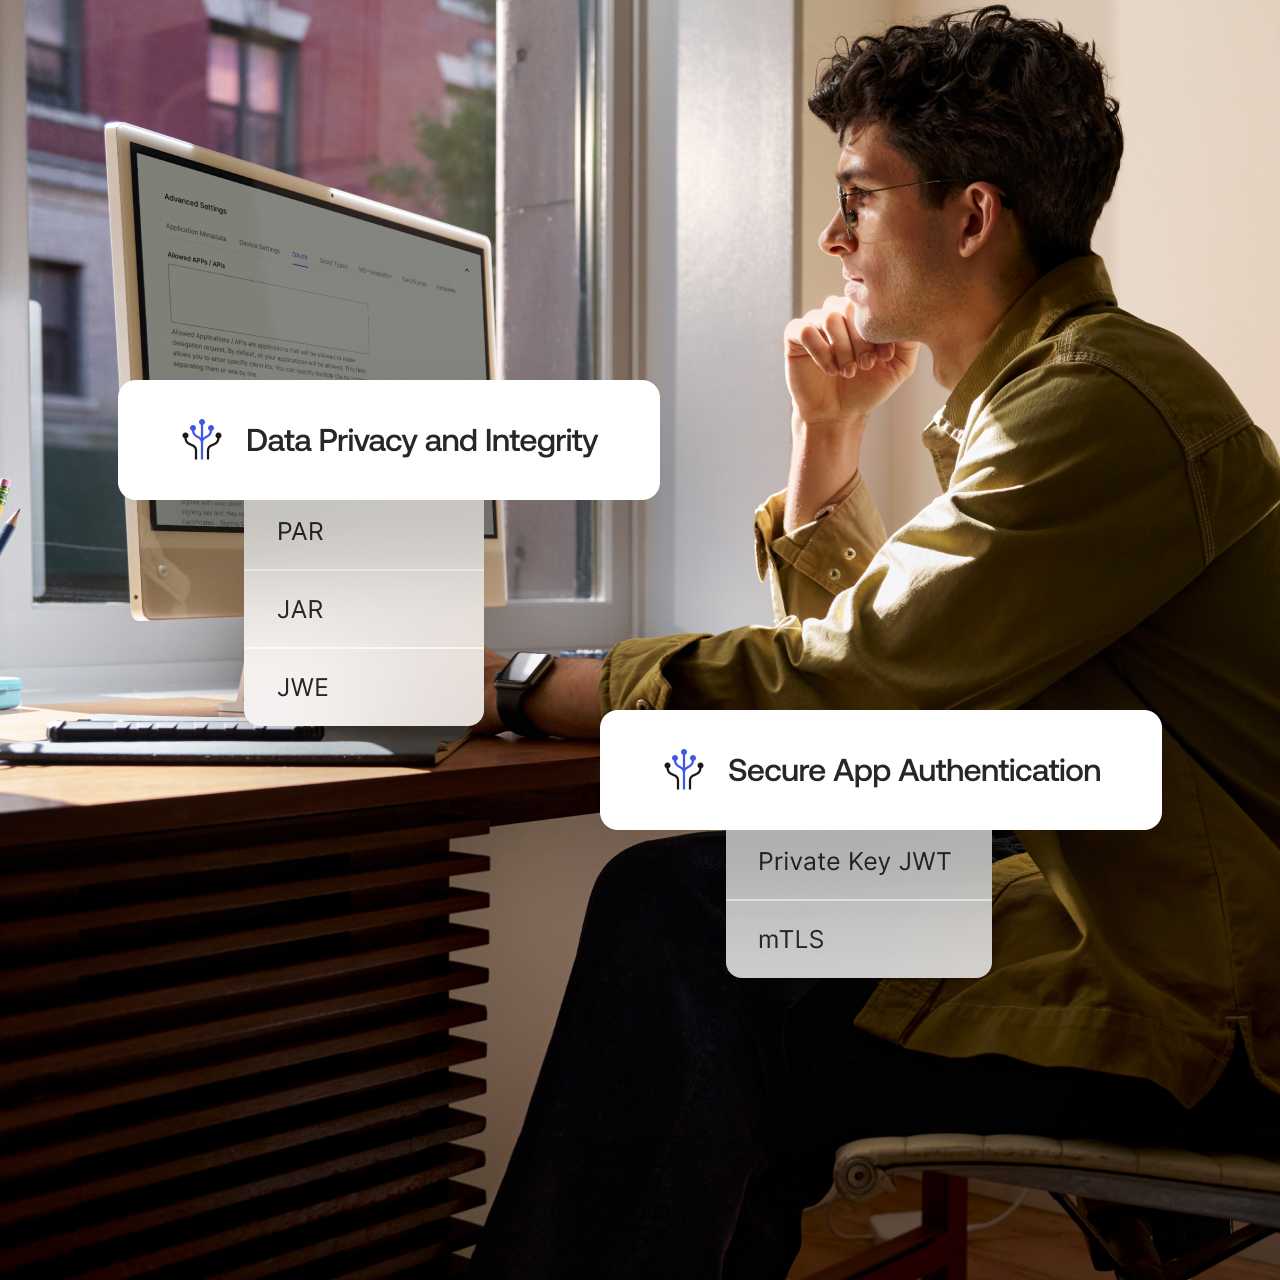 The words Data Privacy and Integrity and Secure App Authentication overlaying an image of a man working on desktop computer.